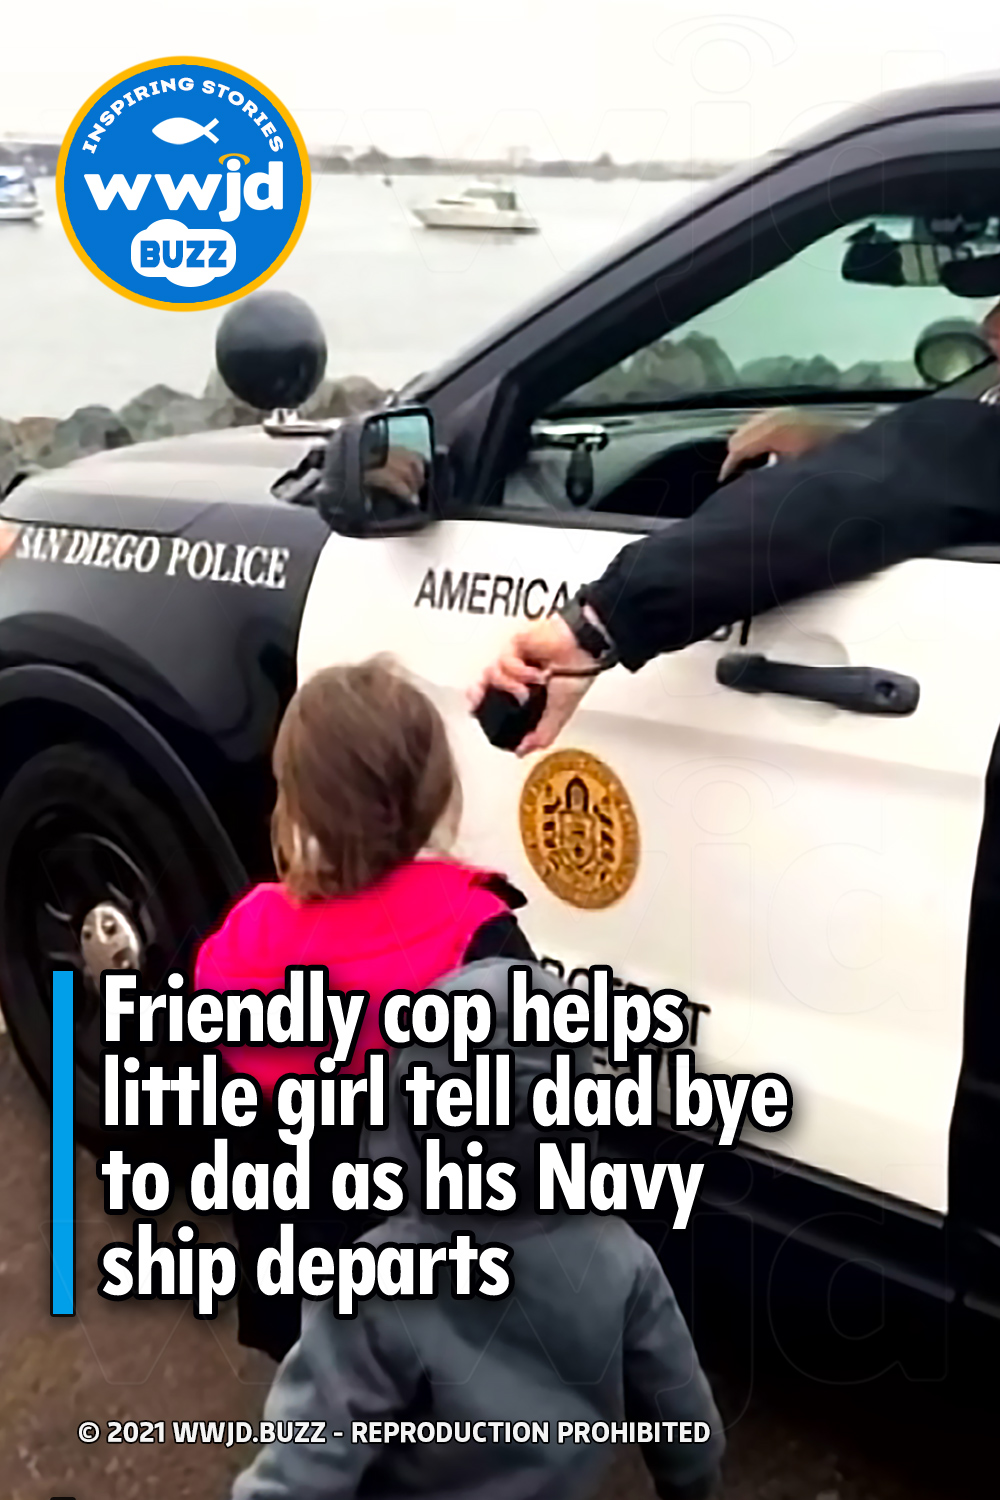 Friendly cop helps little girl tell dad bye to dad as his Navy ship departs